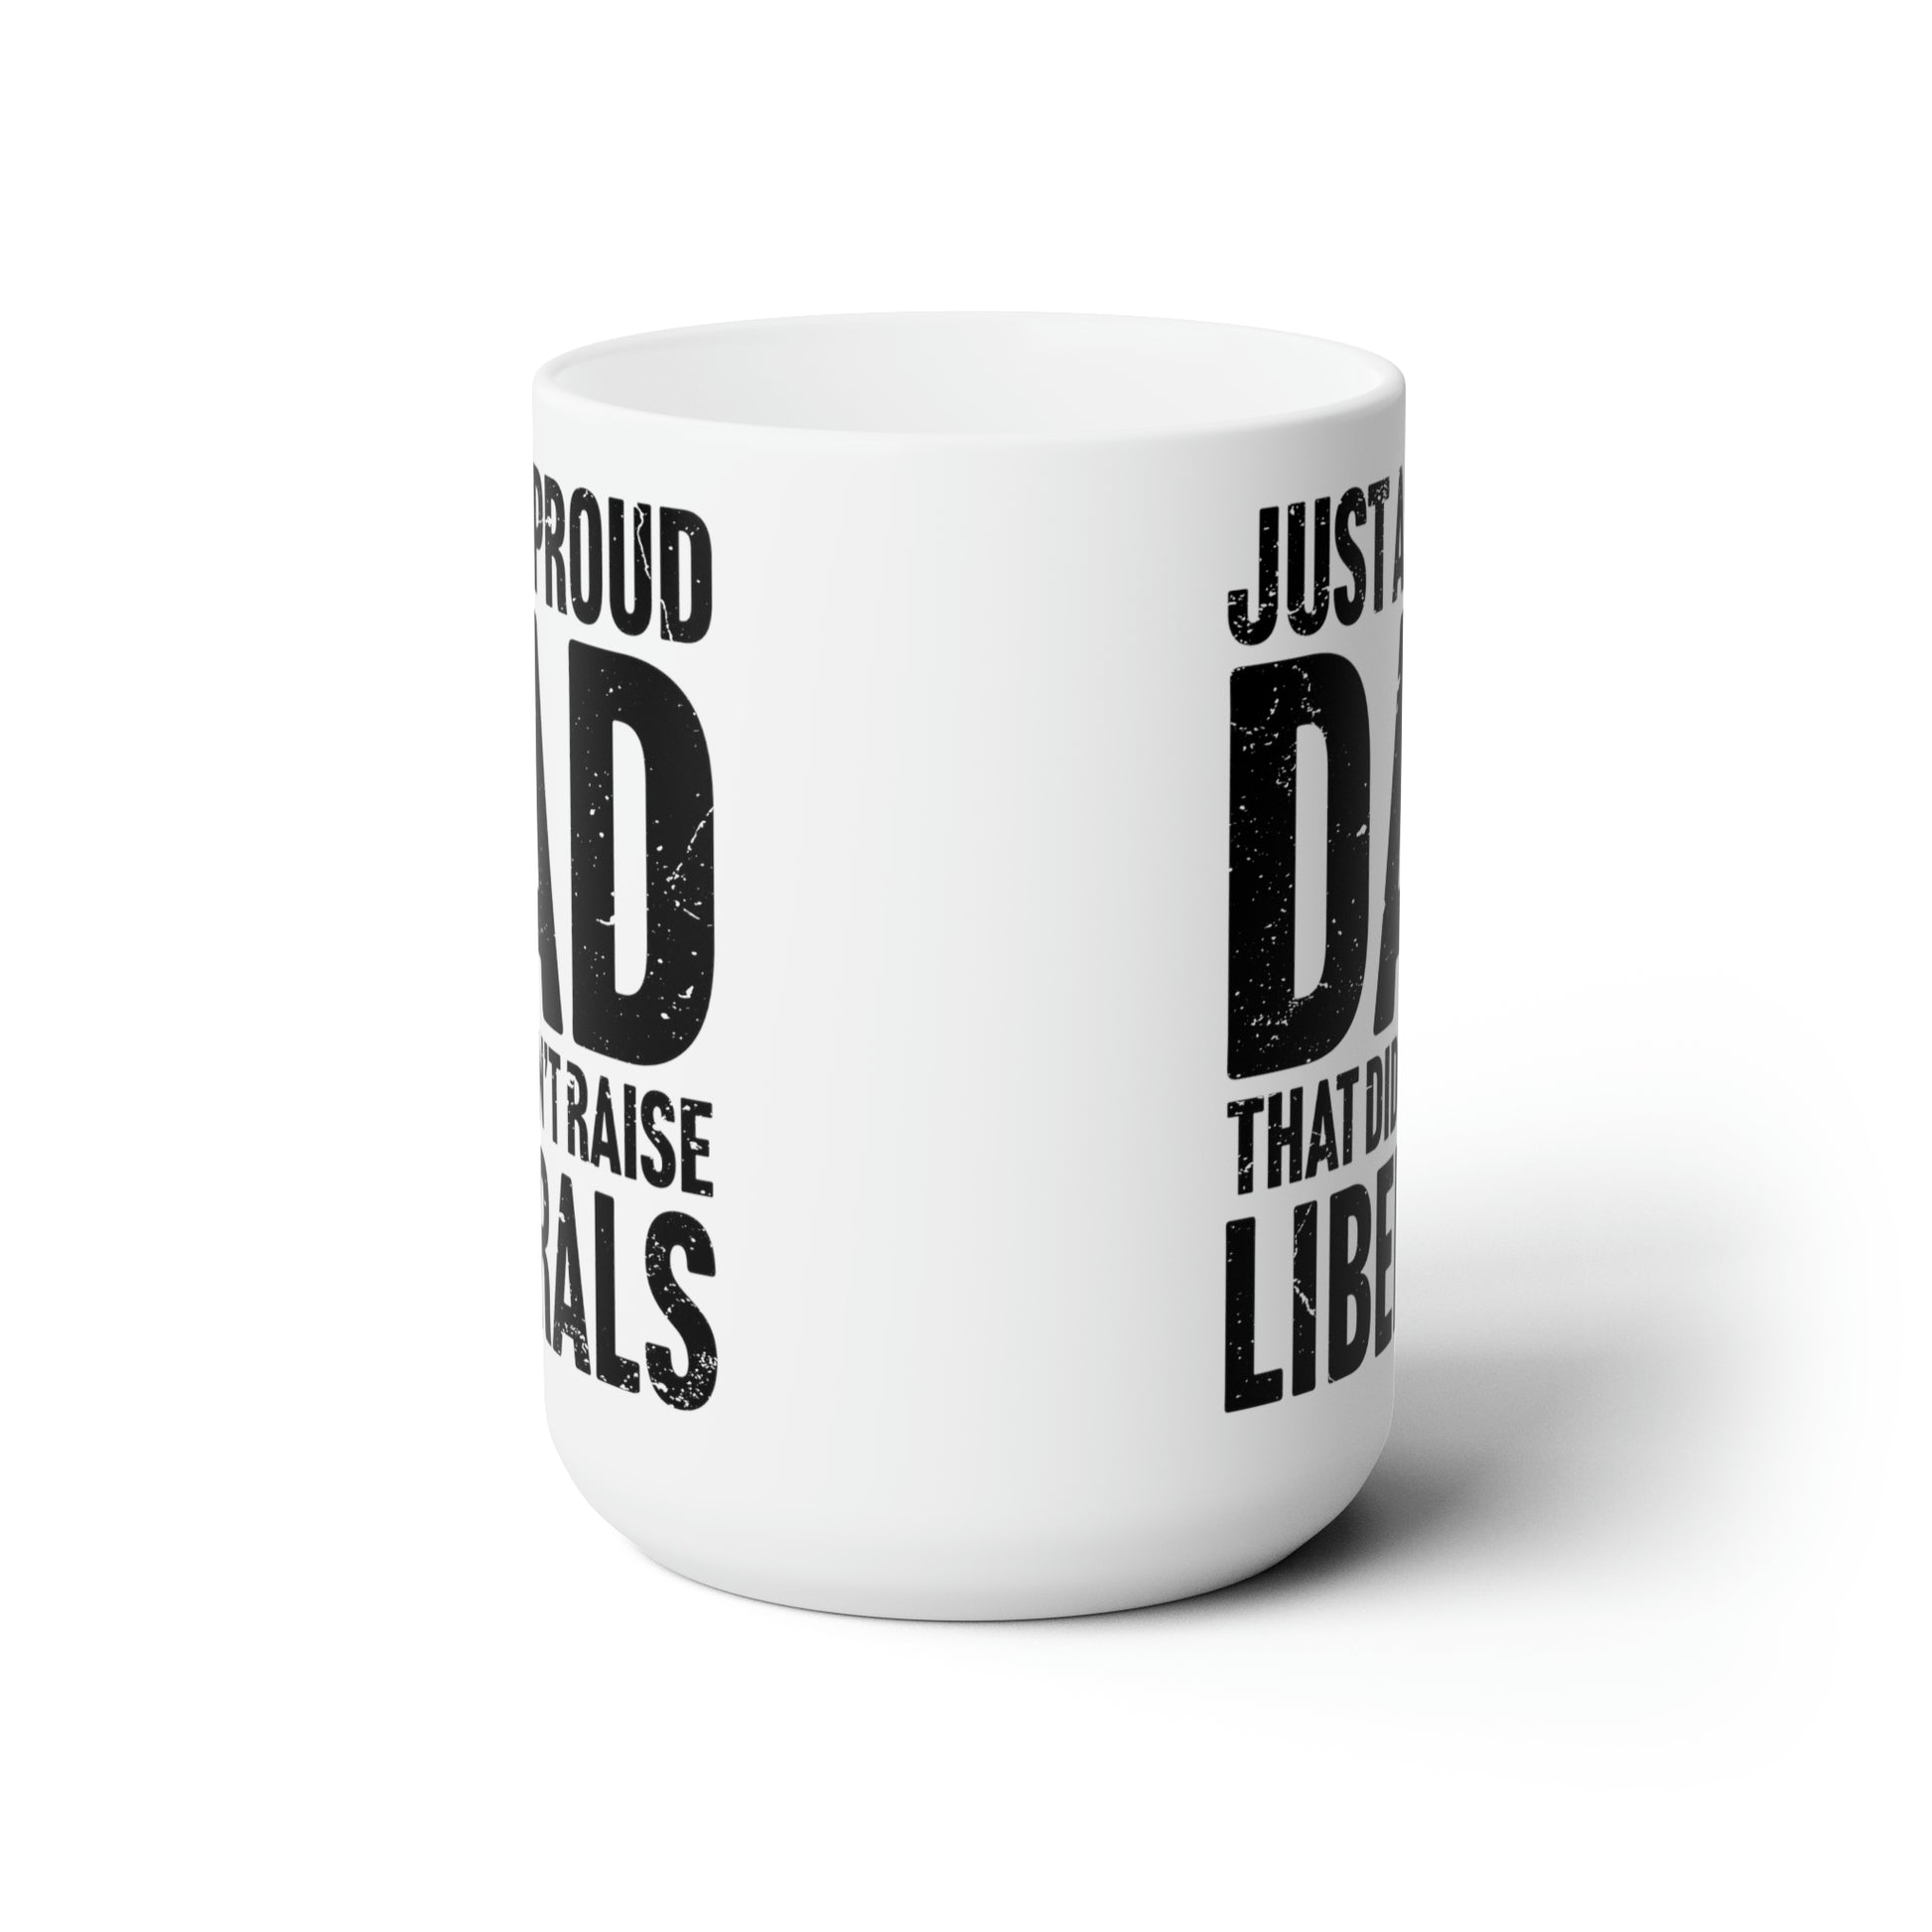 Funny Political Coffee Mug, Proud Conservative Dad, Anti-Liberal Humor, Gag Gift for Republicans, Father's Day Novelty Cup - News For Reasonable People